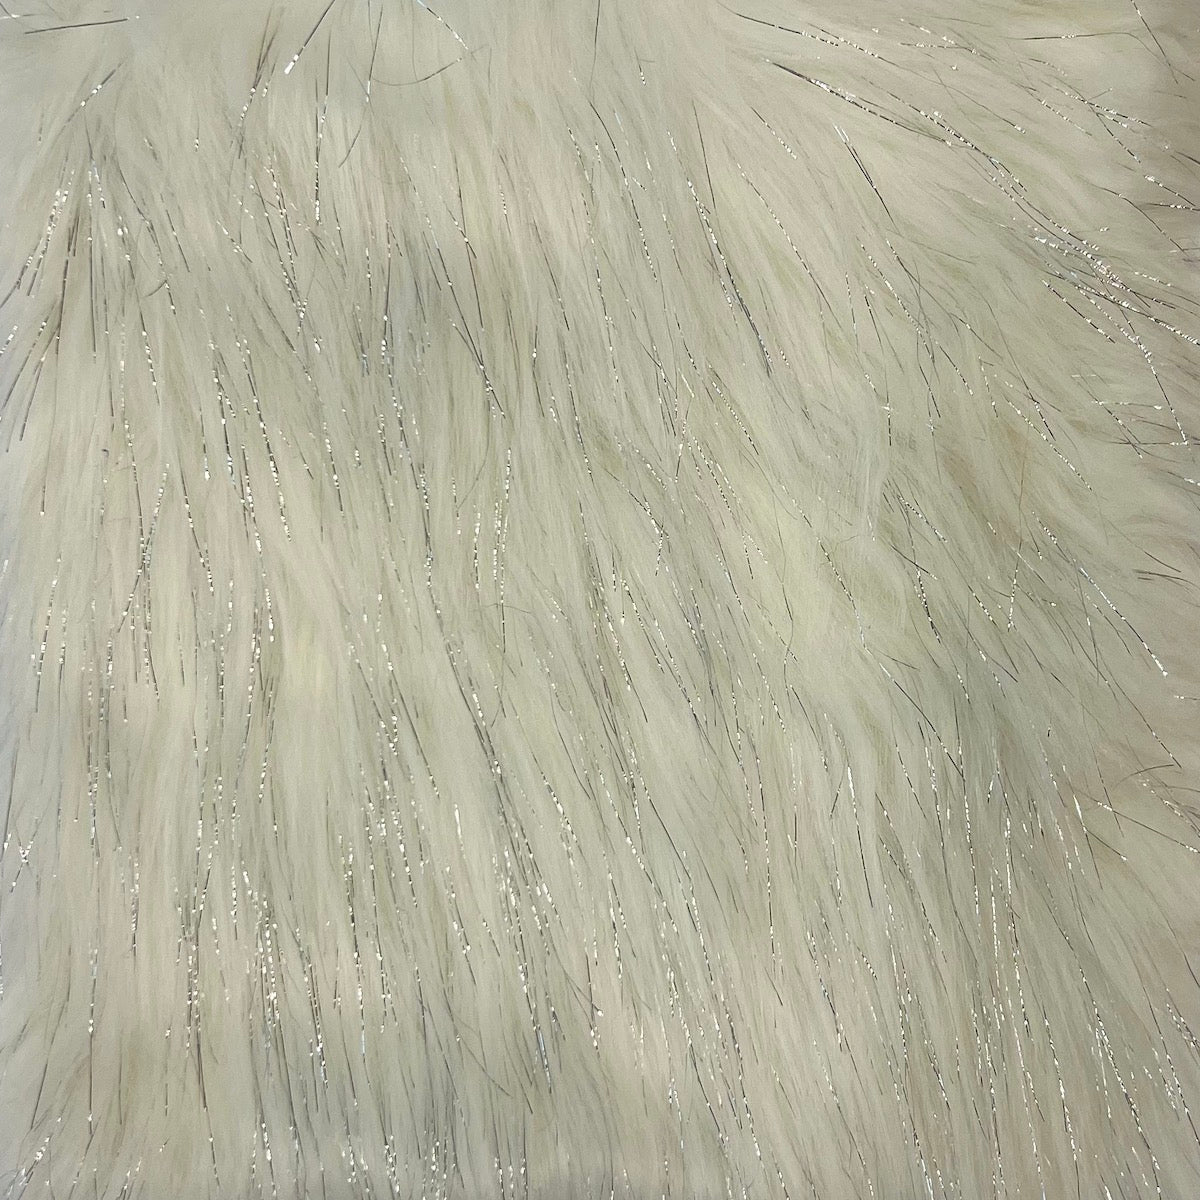 TINSEL - Faux Fur Fabric Long Pile Sparkling Tinsel - WHITE - Sold